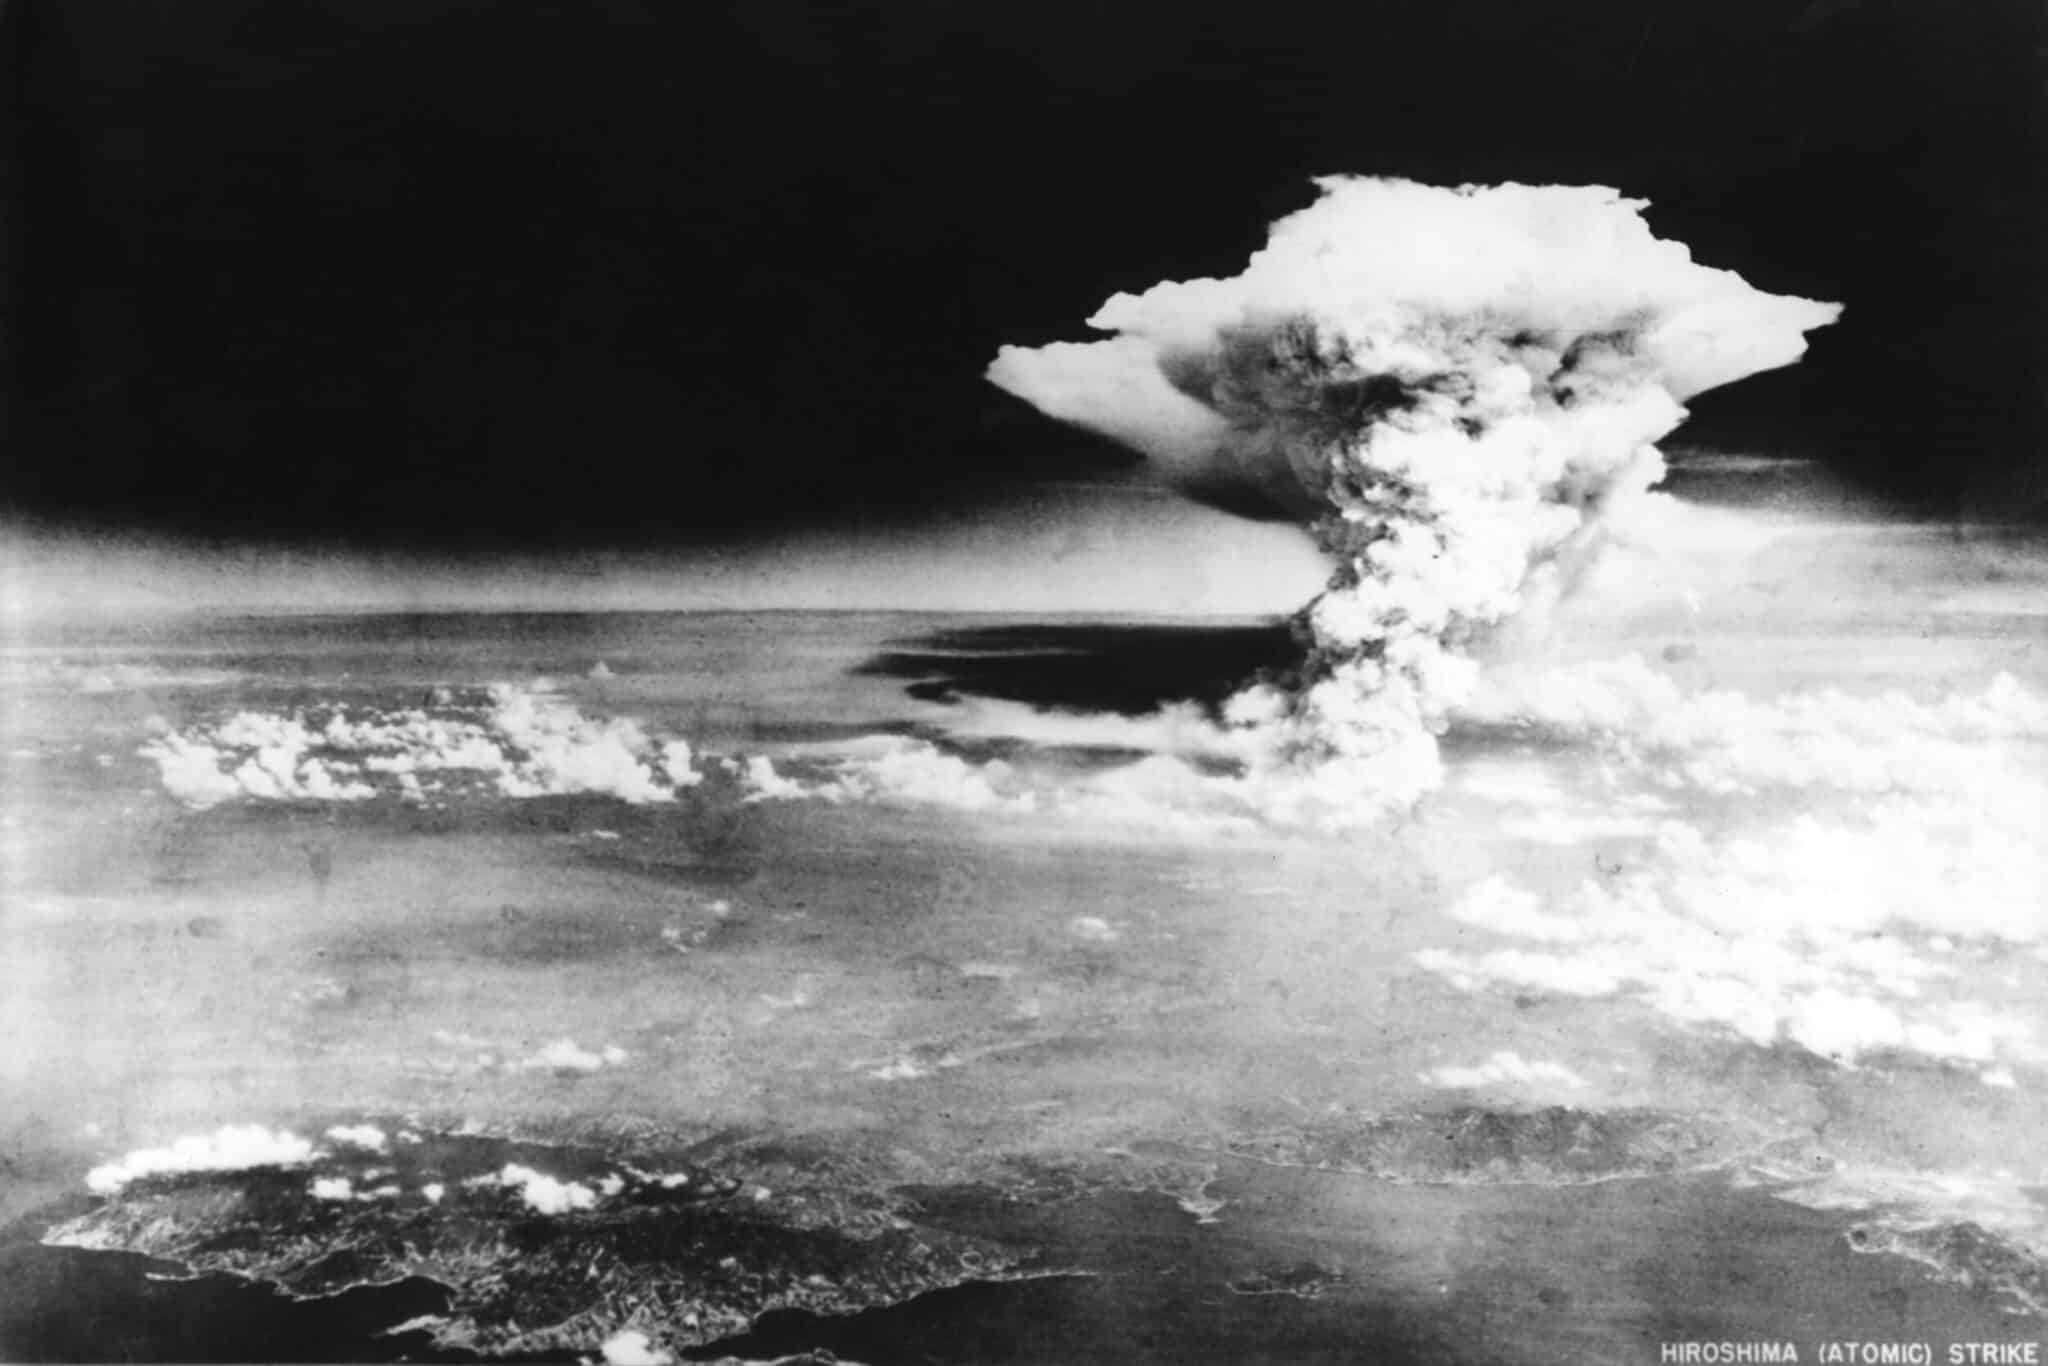 A mushroom cloud rises above Hiroshima after the US dropped a nuclear bomb on the city on August 6, 1945. Photo: Hiroshima Peace Memorial Museum.